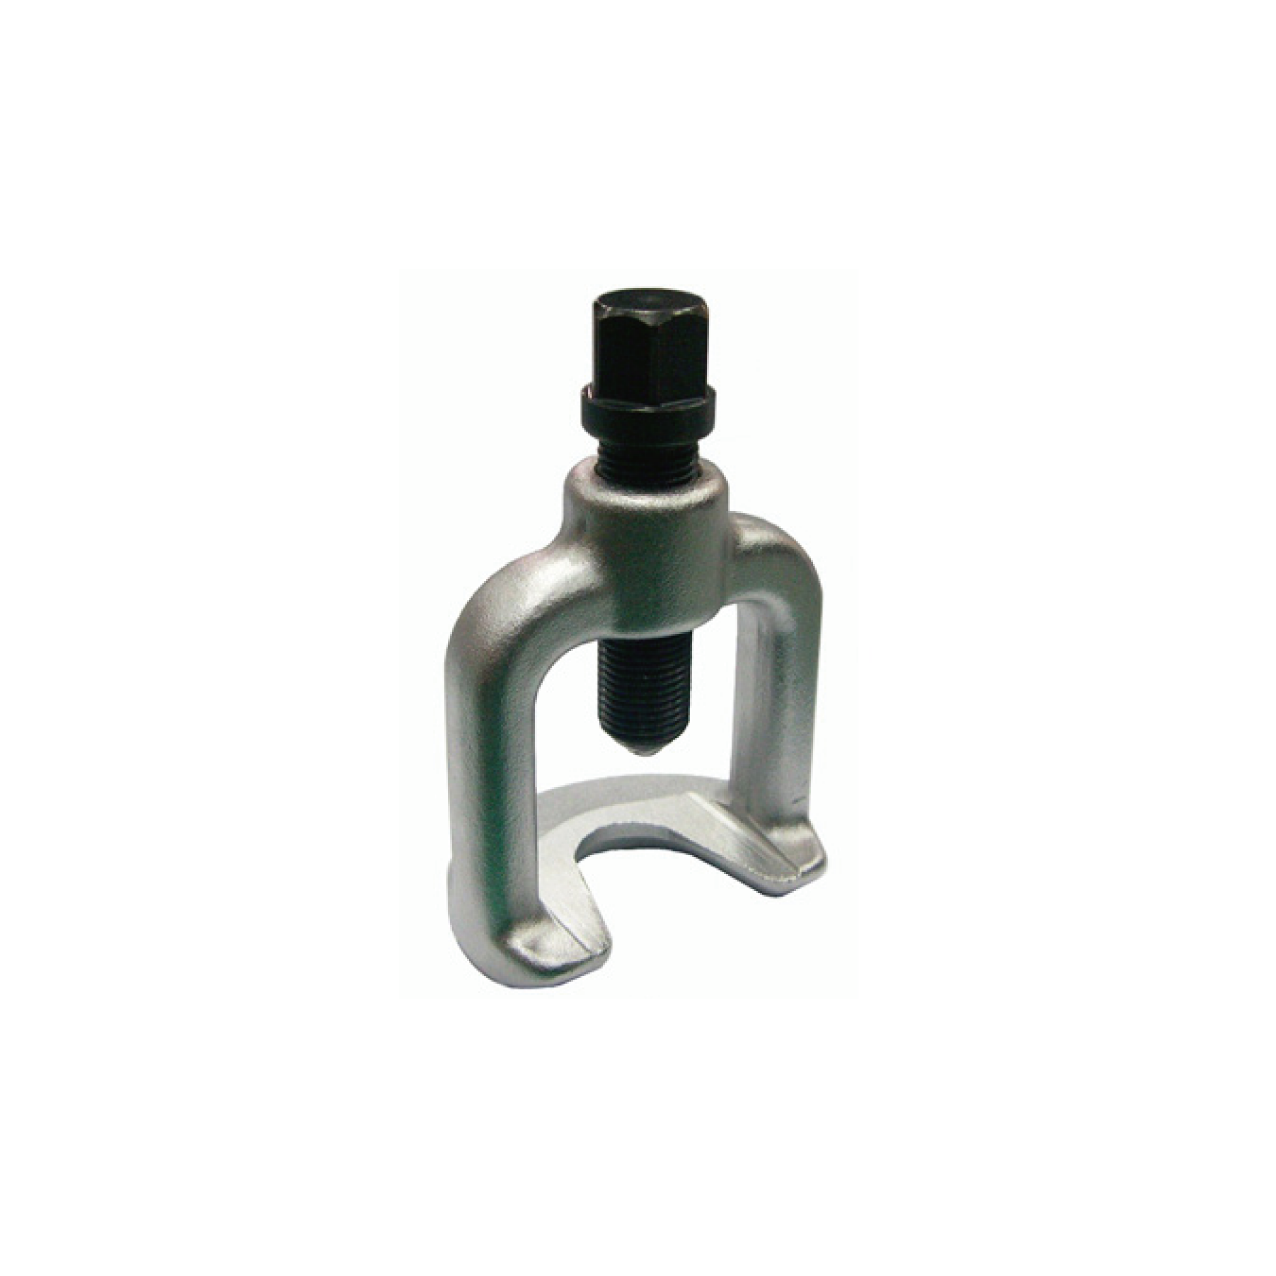 BALL JOINT SEPARATOR (18mm)